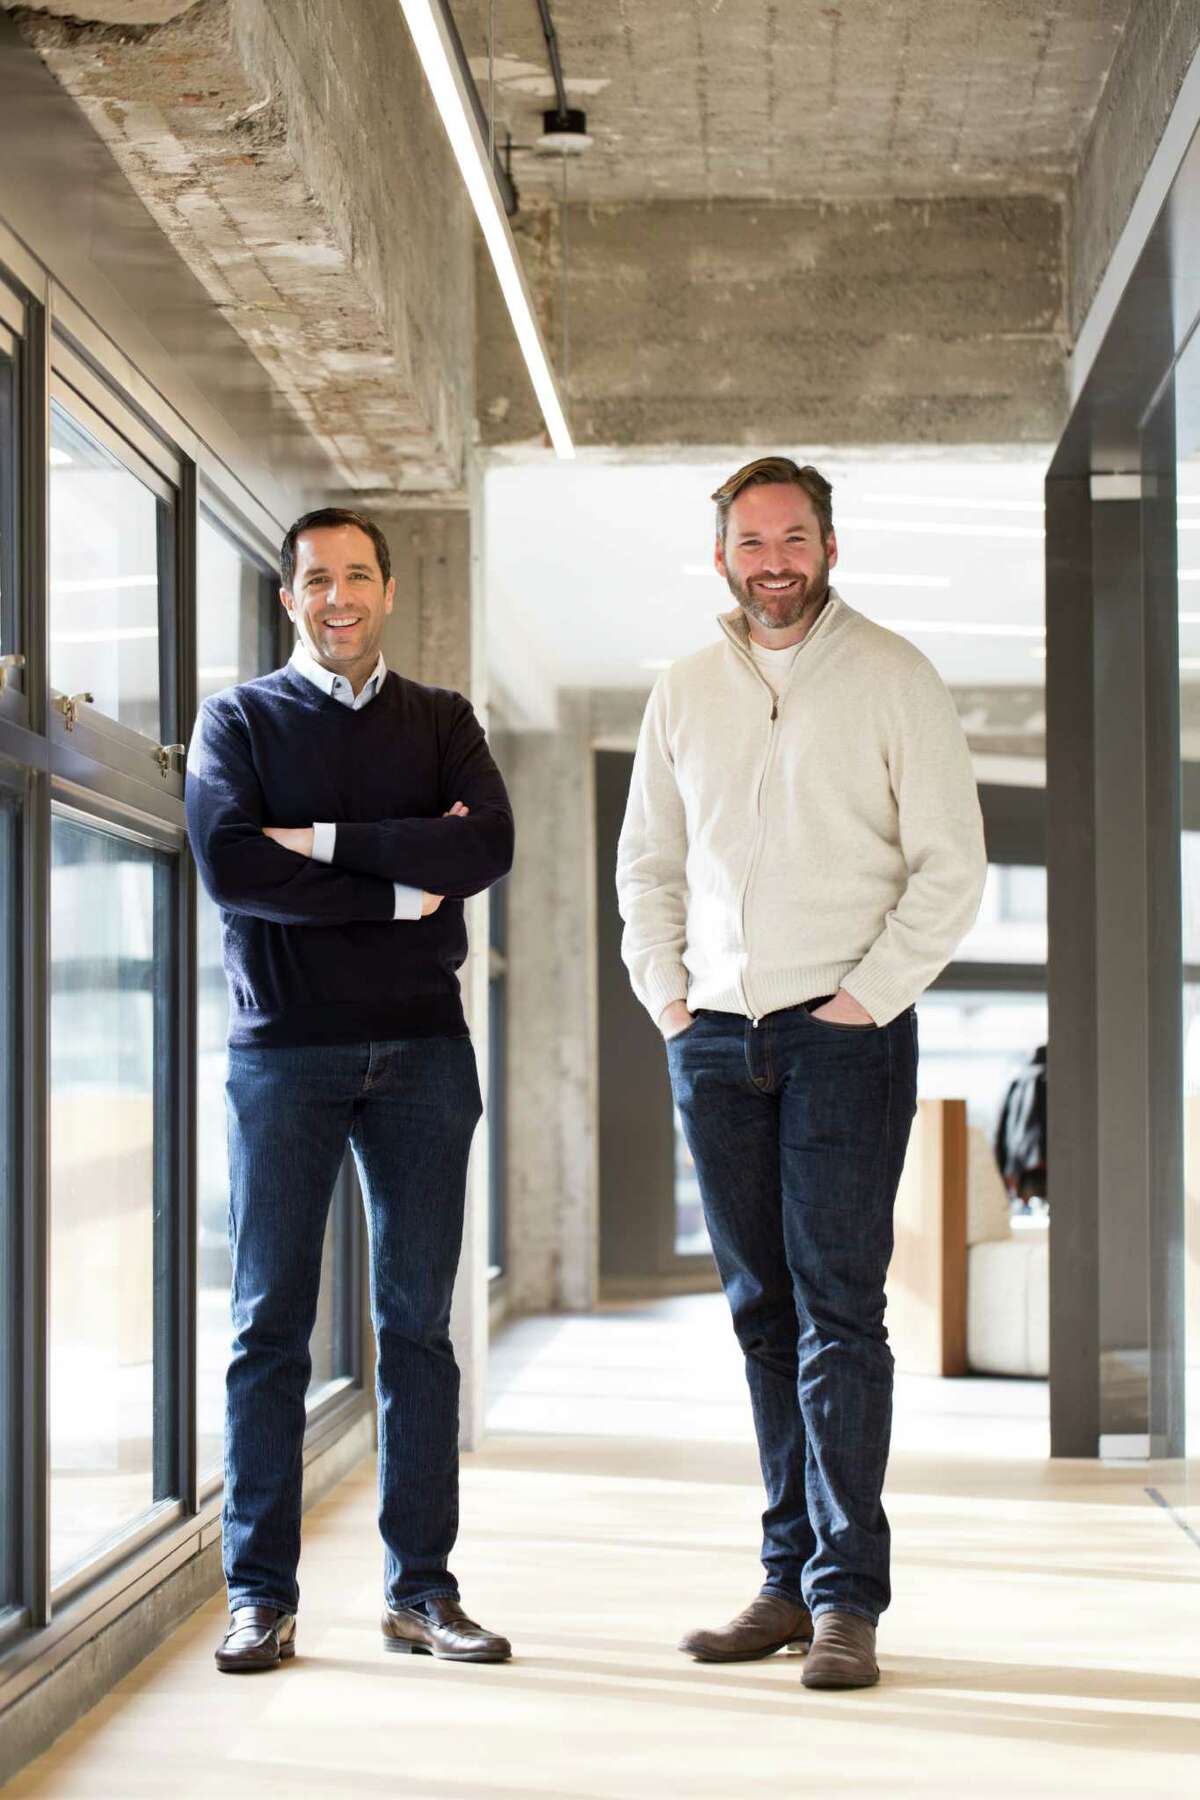 Stuart Peterson (left) and Mike Harden are co-founders of Artis Ventures in the Warfield bui.